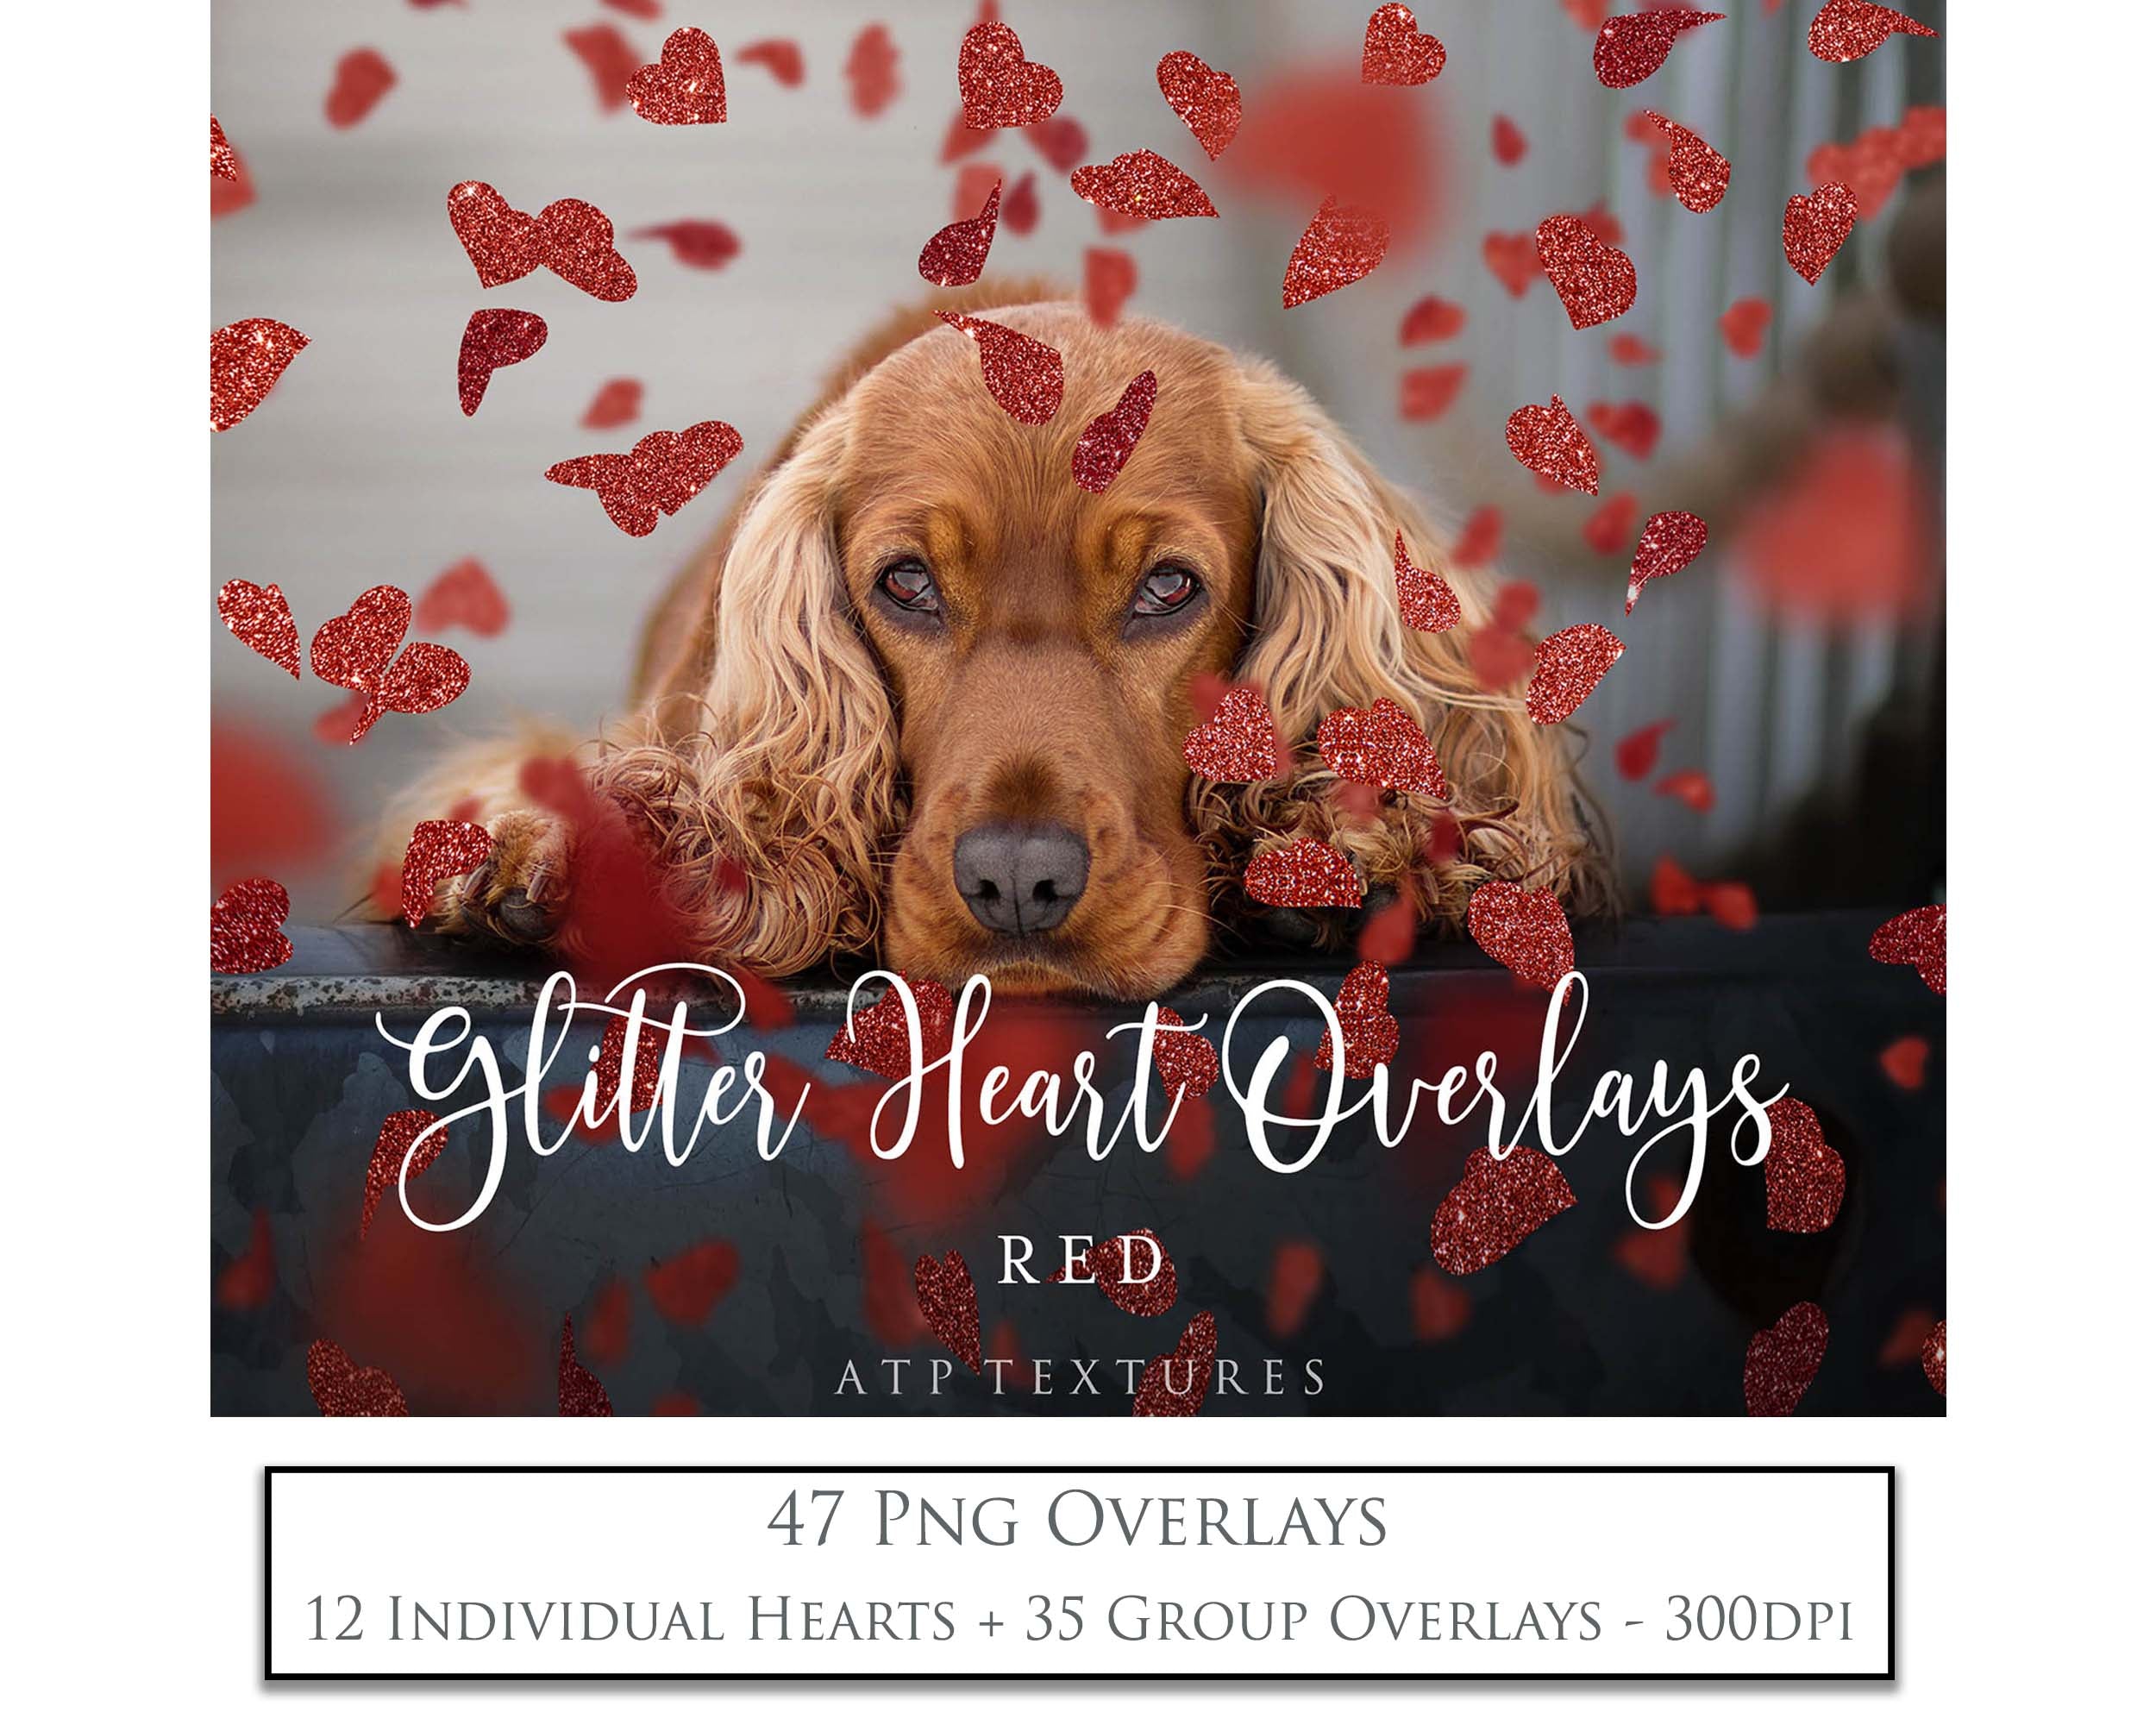 Png heart clipart, Png heart confetti, Overlays for photographers, Photoshop Overlay, digital edits, photoshop. Photography Editing graphic assets. Red, gold, falling valentine love. Wedding, Couples Photo. High resolution, ATP textures.